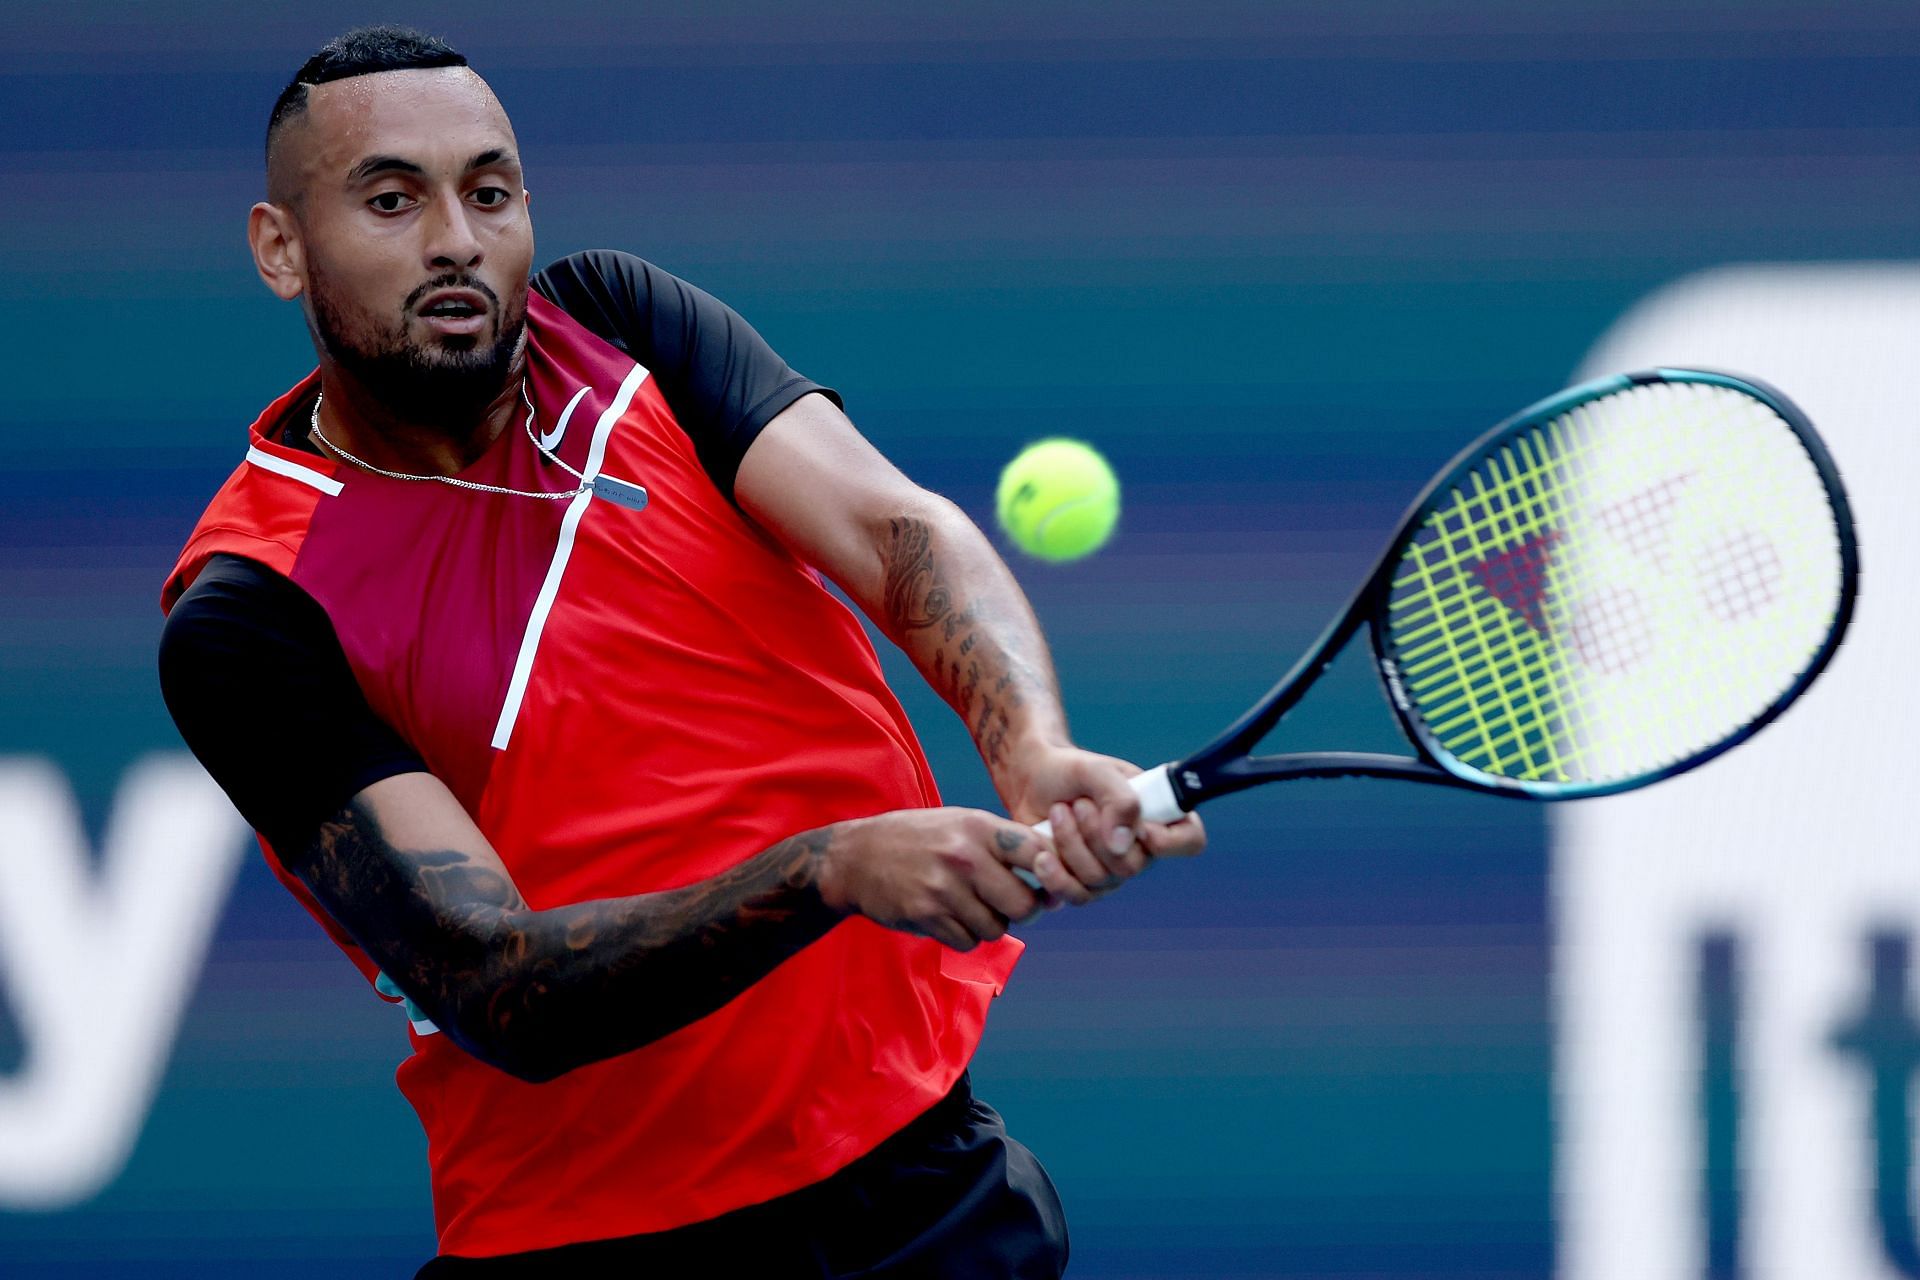 Kyrgios in action at the 2022 Miami Open